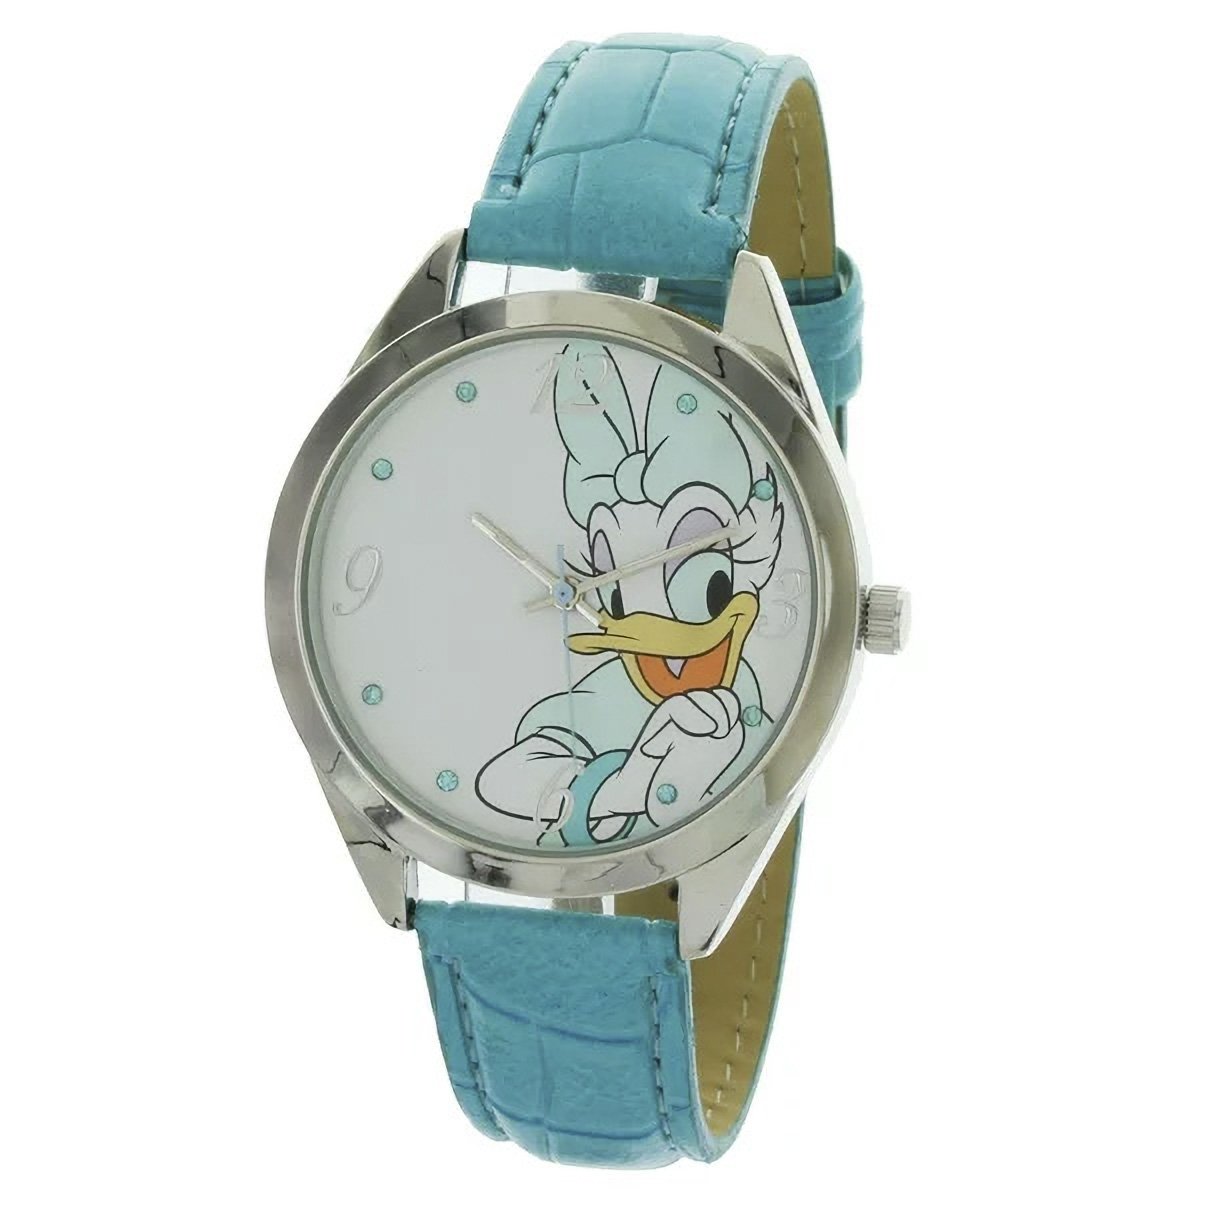 Model: Disney Daisy Duck Watch with Turquoise Genuine Leather Strap